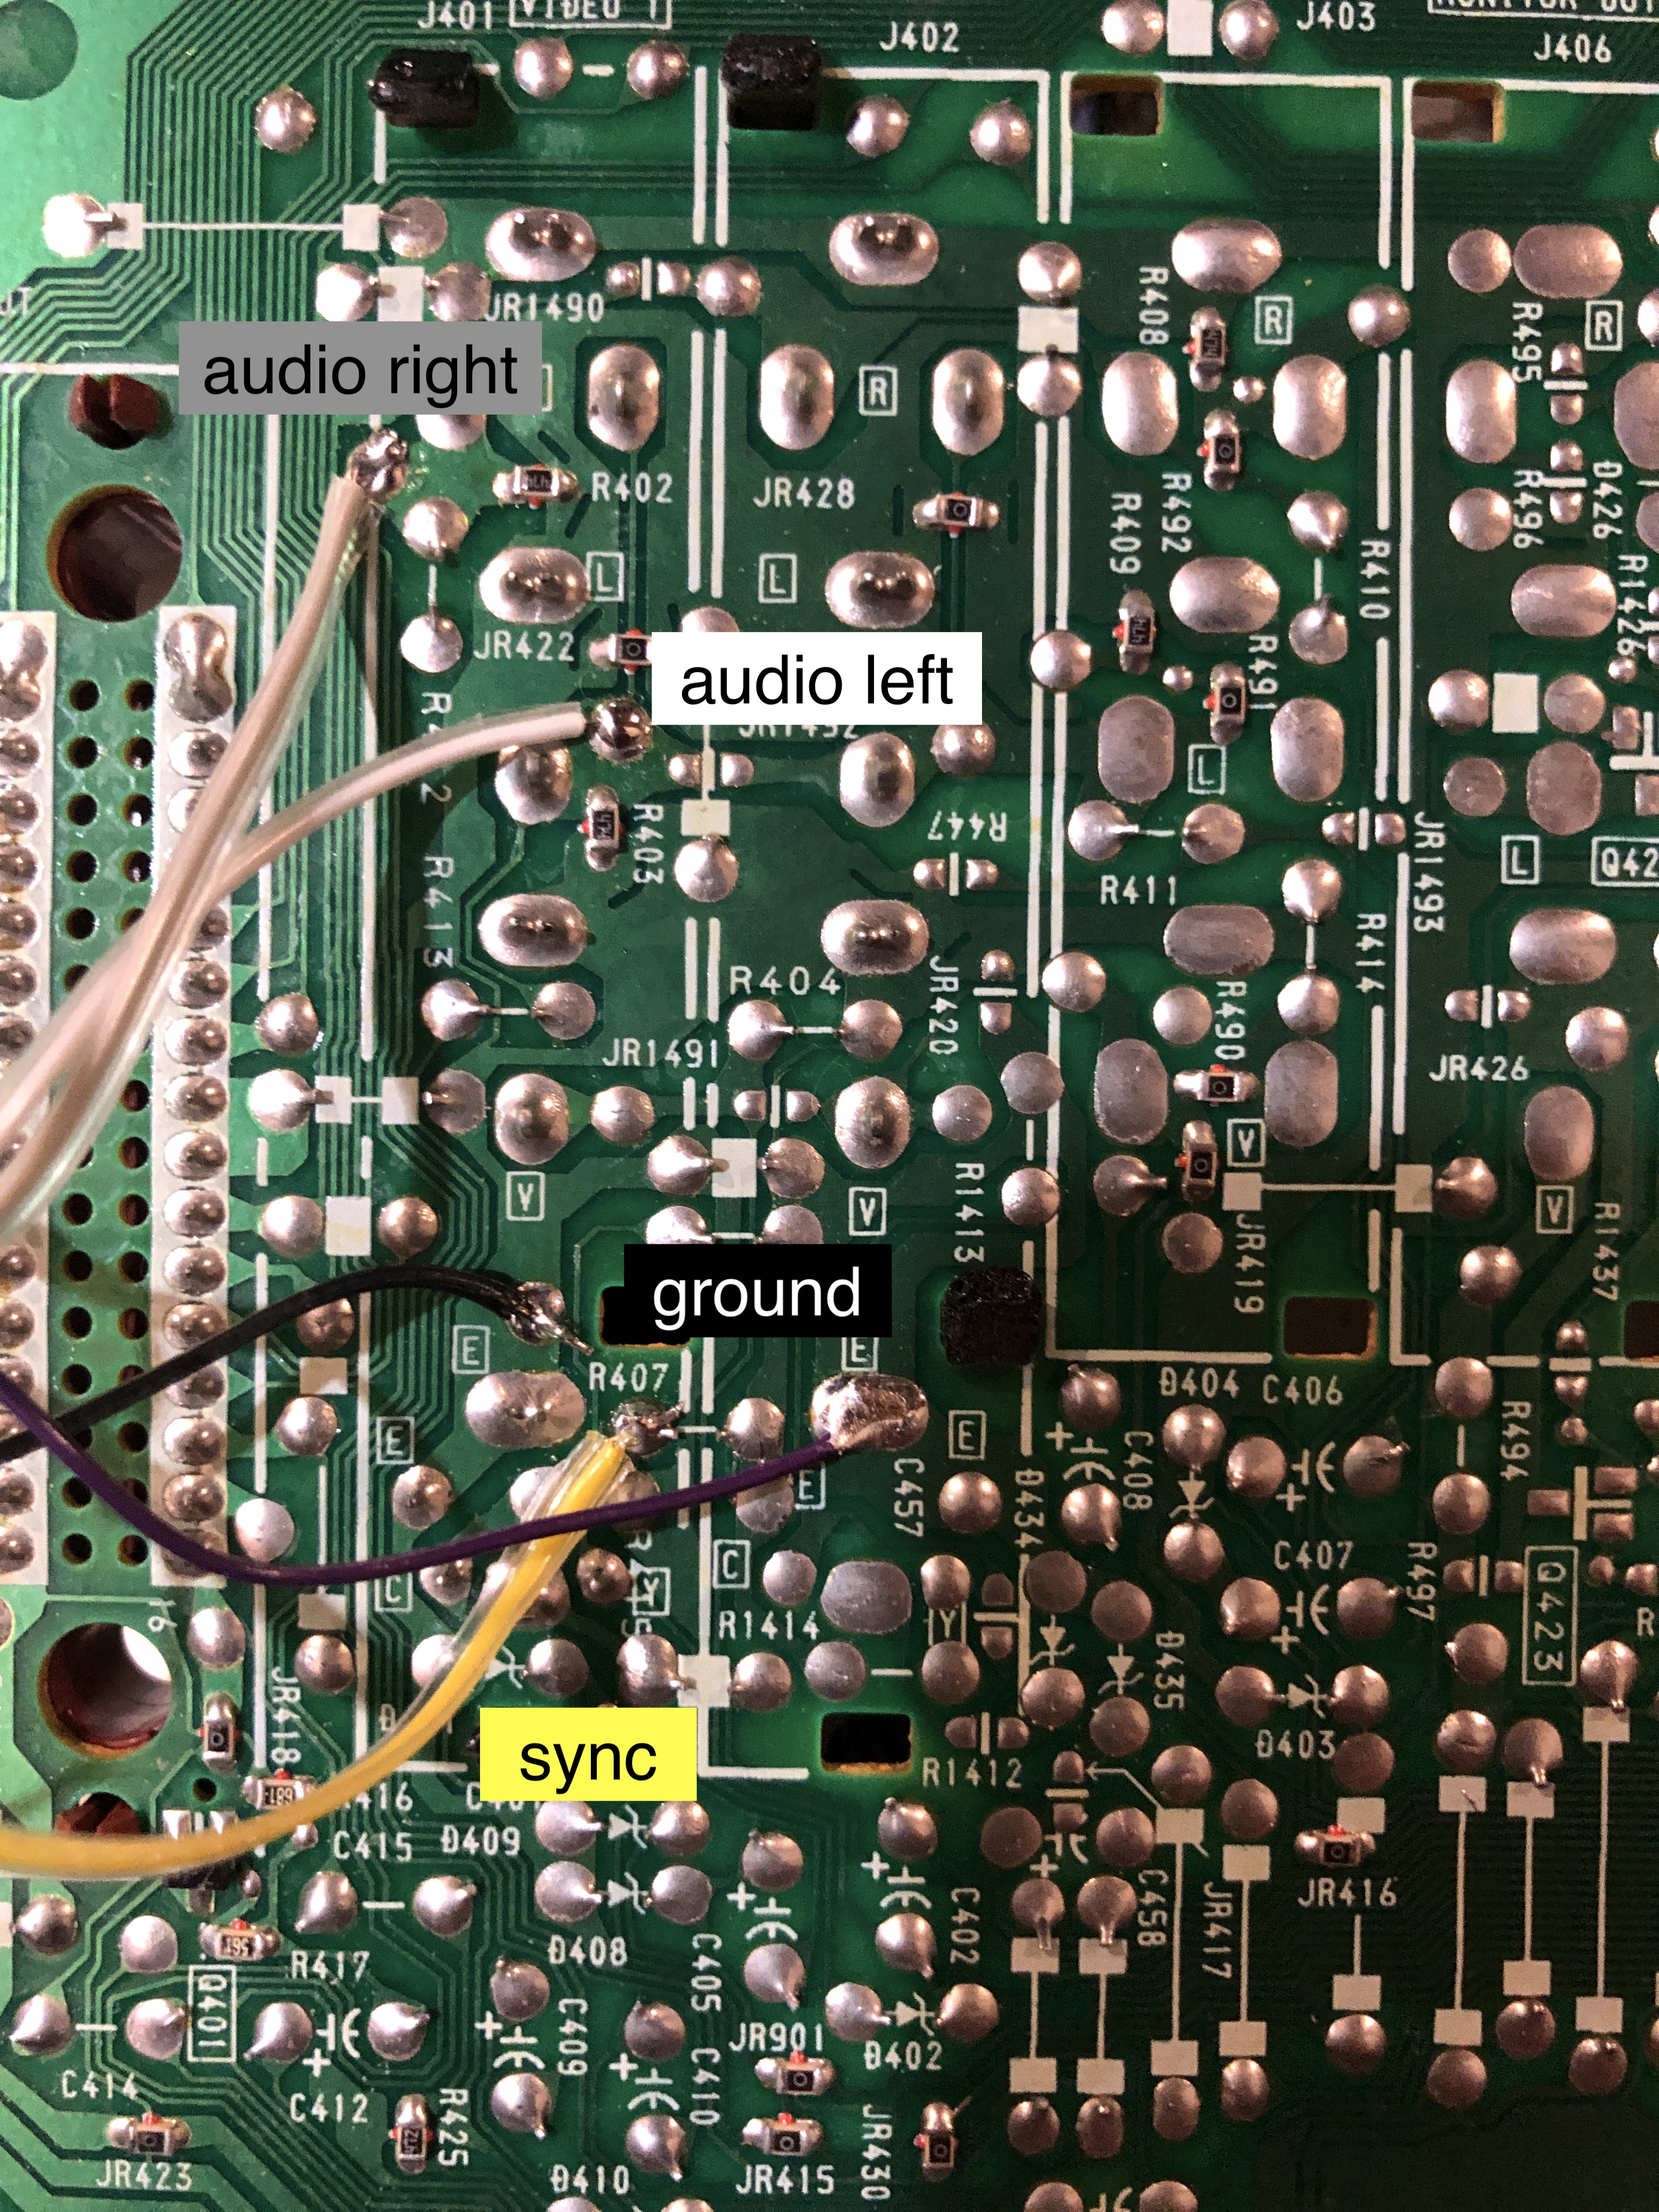 Audio and sync wires